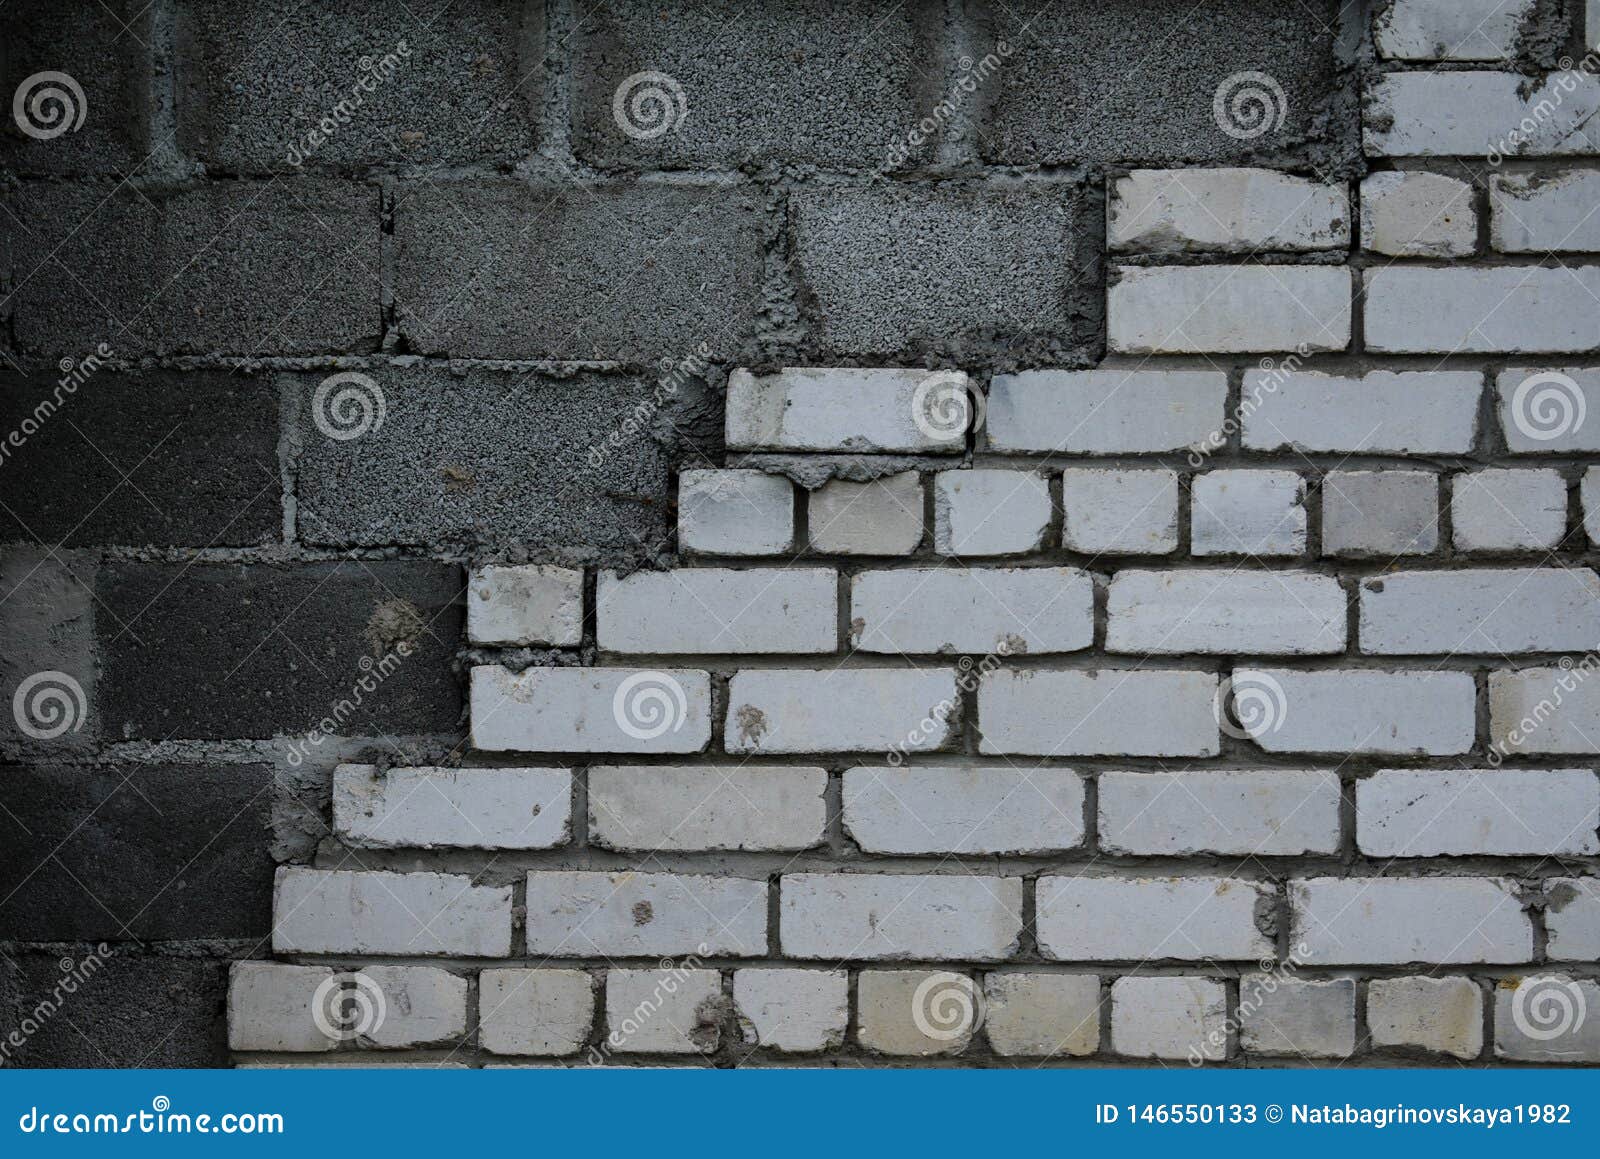 White Brick Wall Background Texture Cement Old Stock Image Image Of Beauty Drawing